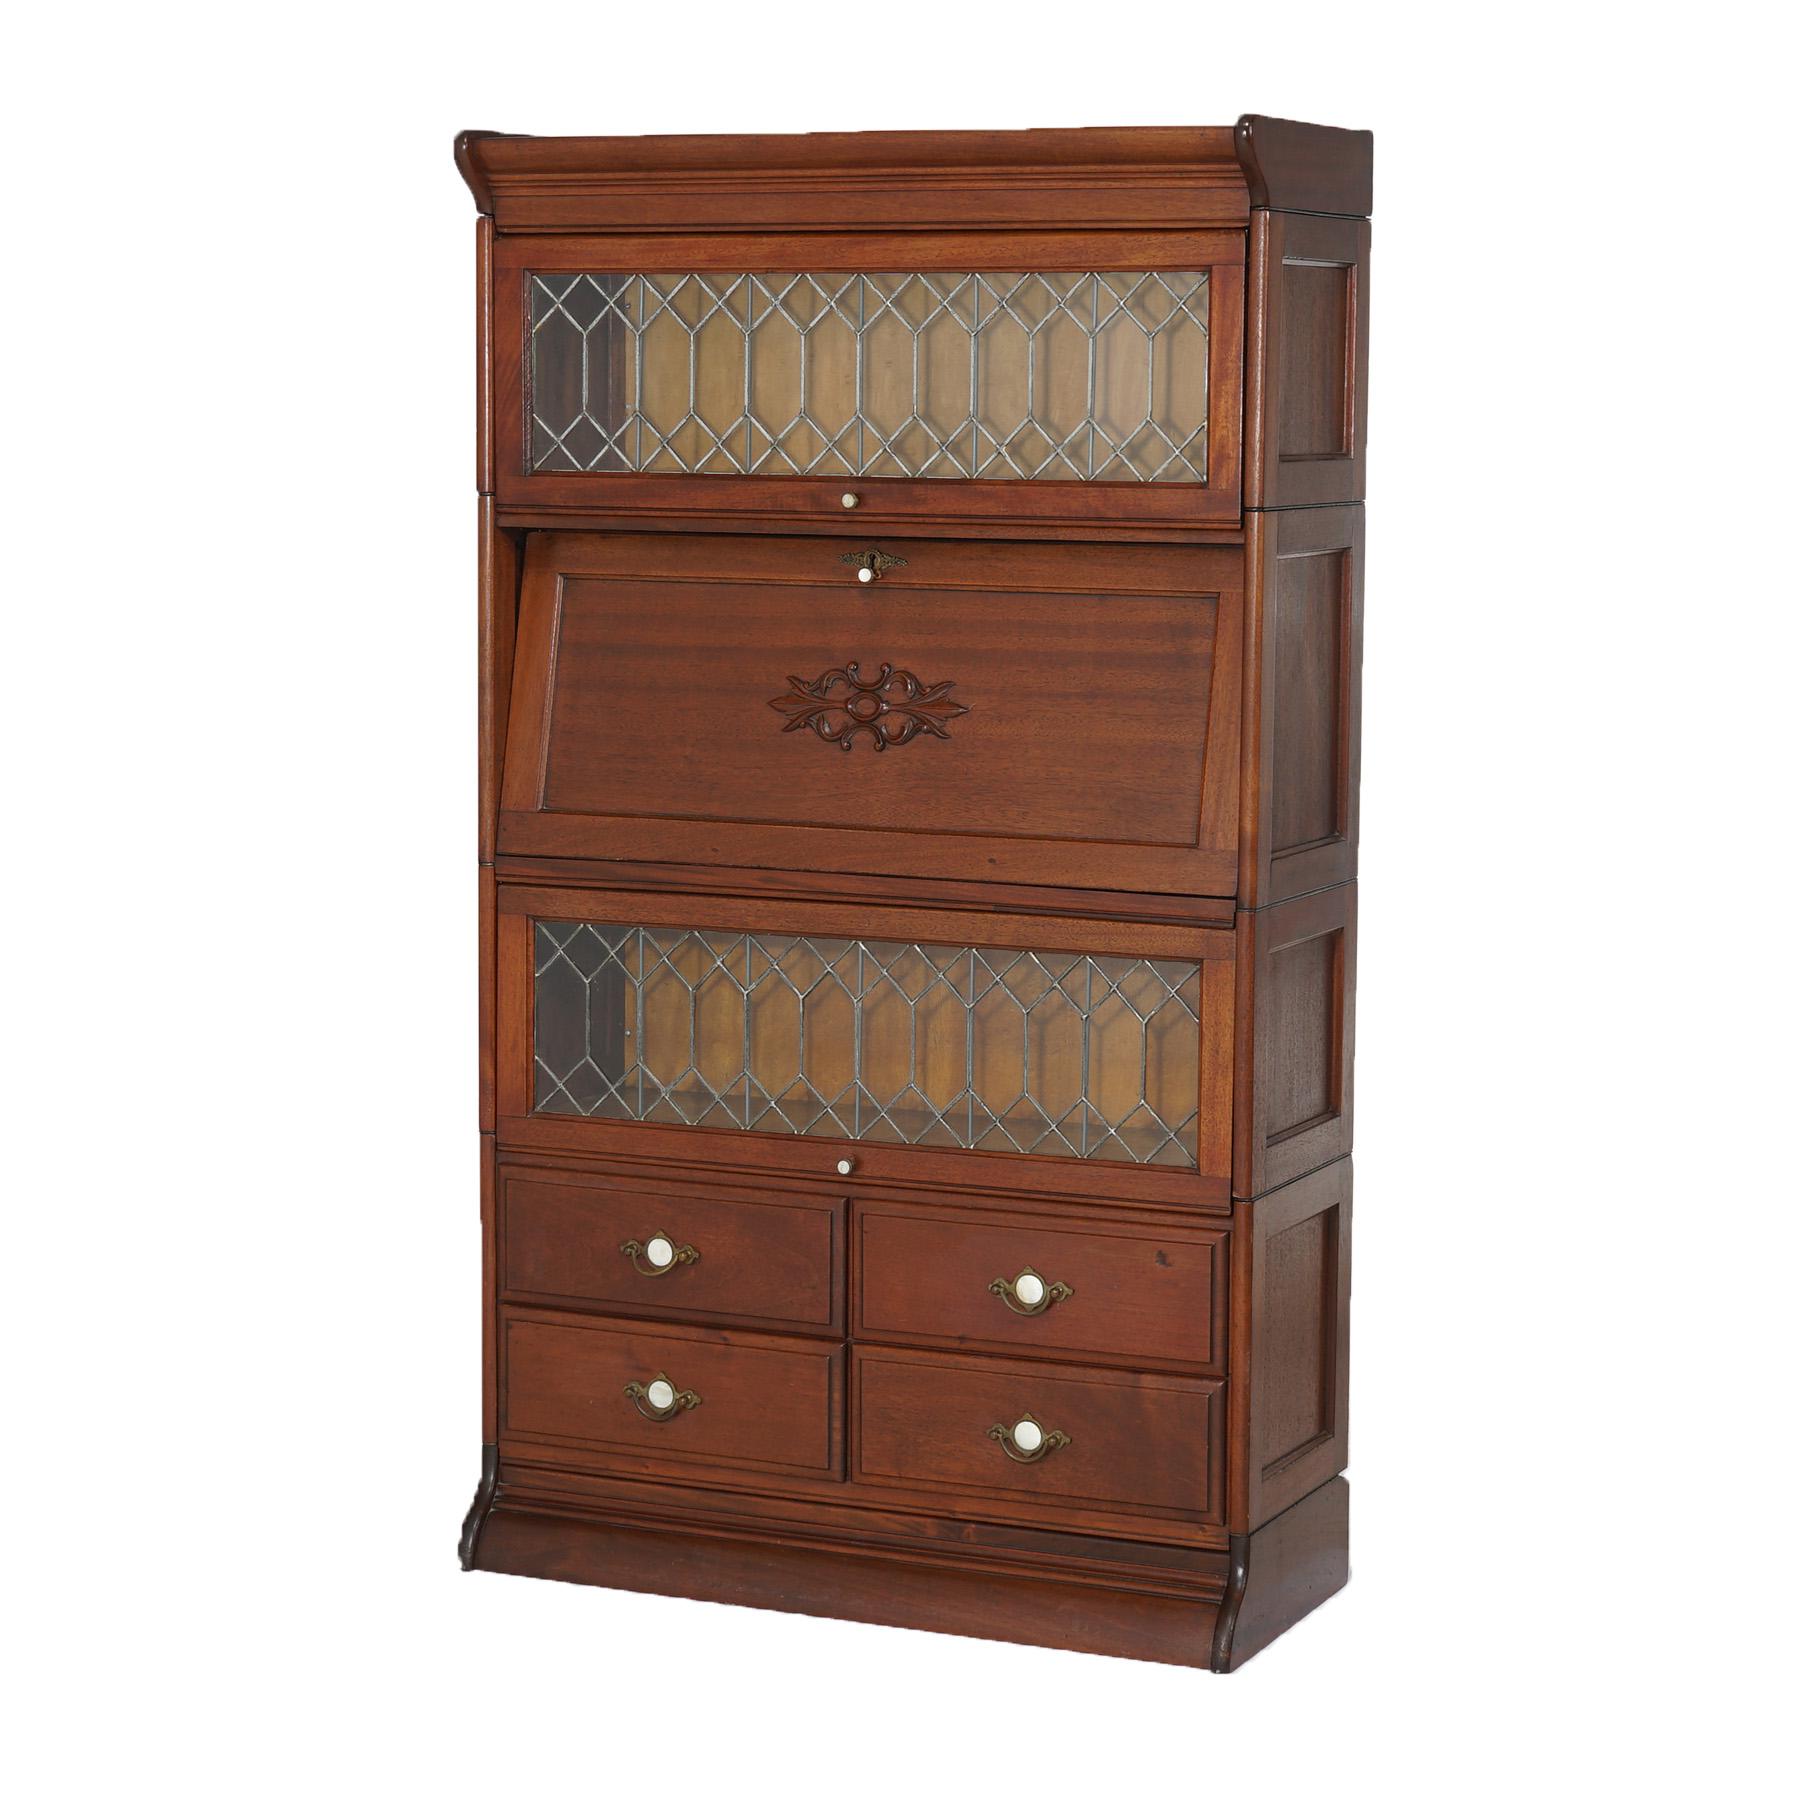 ***Ask About Reduced In-House Shipping Rates - Reliable Service & Fully Insured***
An antique Arts & Crafts barrister bookcase secretary by Gunn offers mahogany paneled construction with two stacks having pullout leaded glass doors, single stack